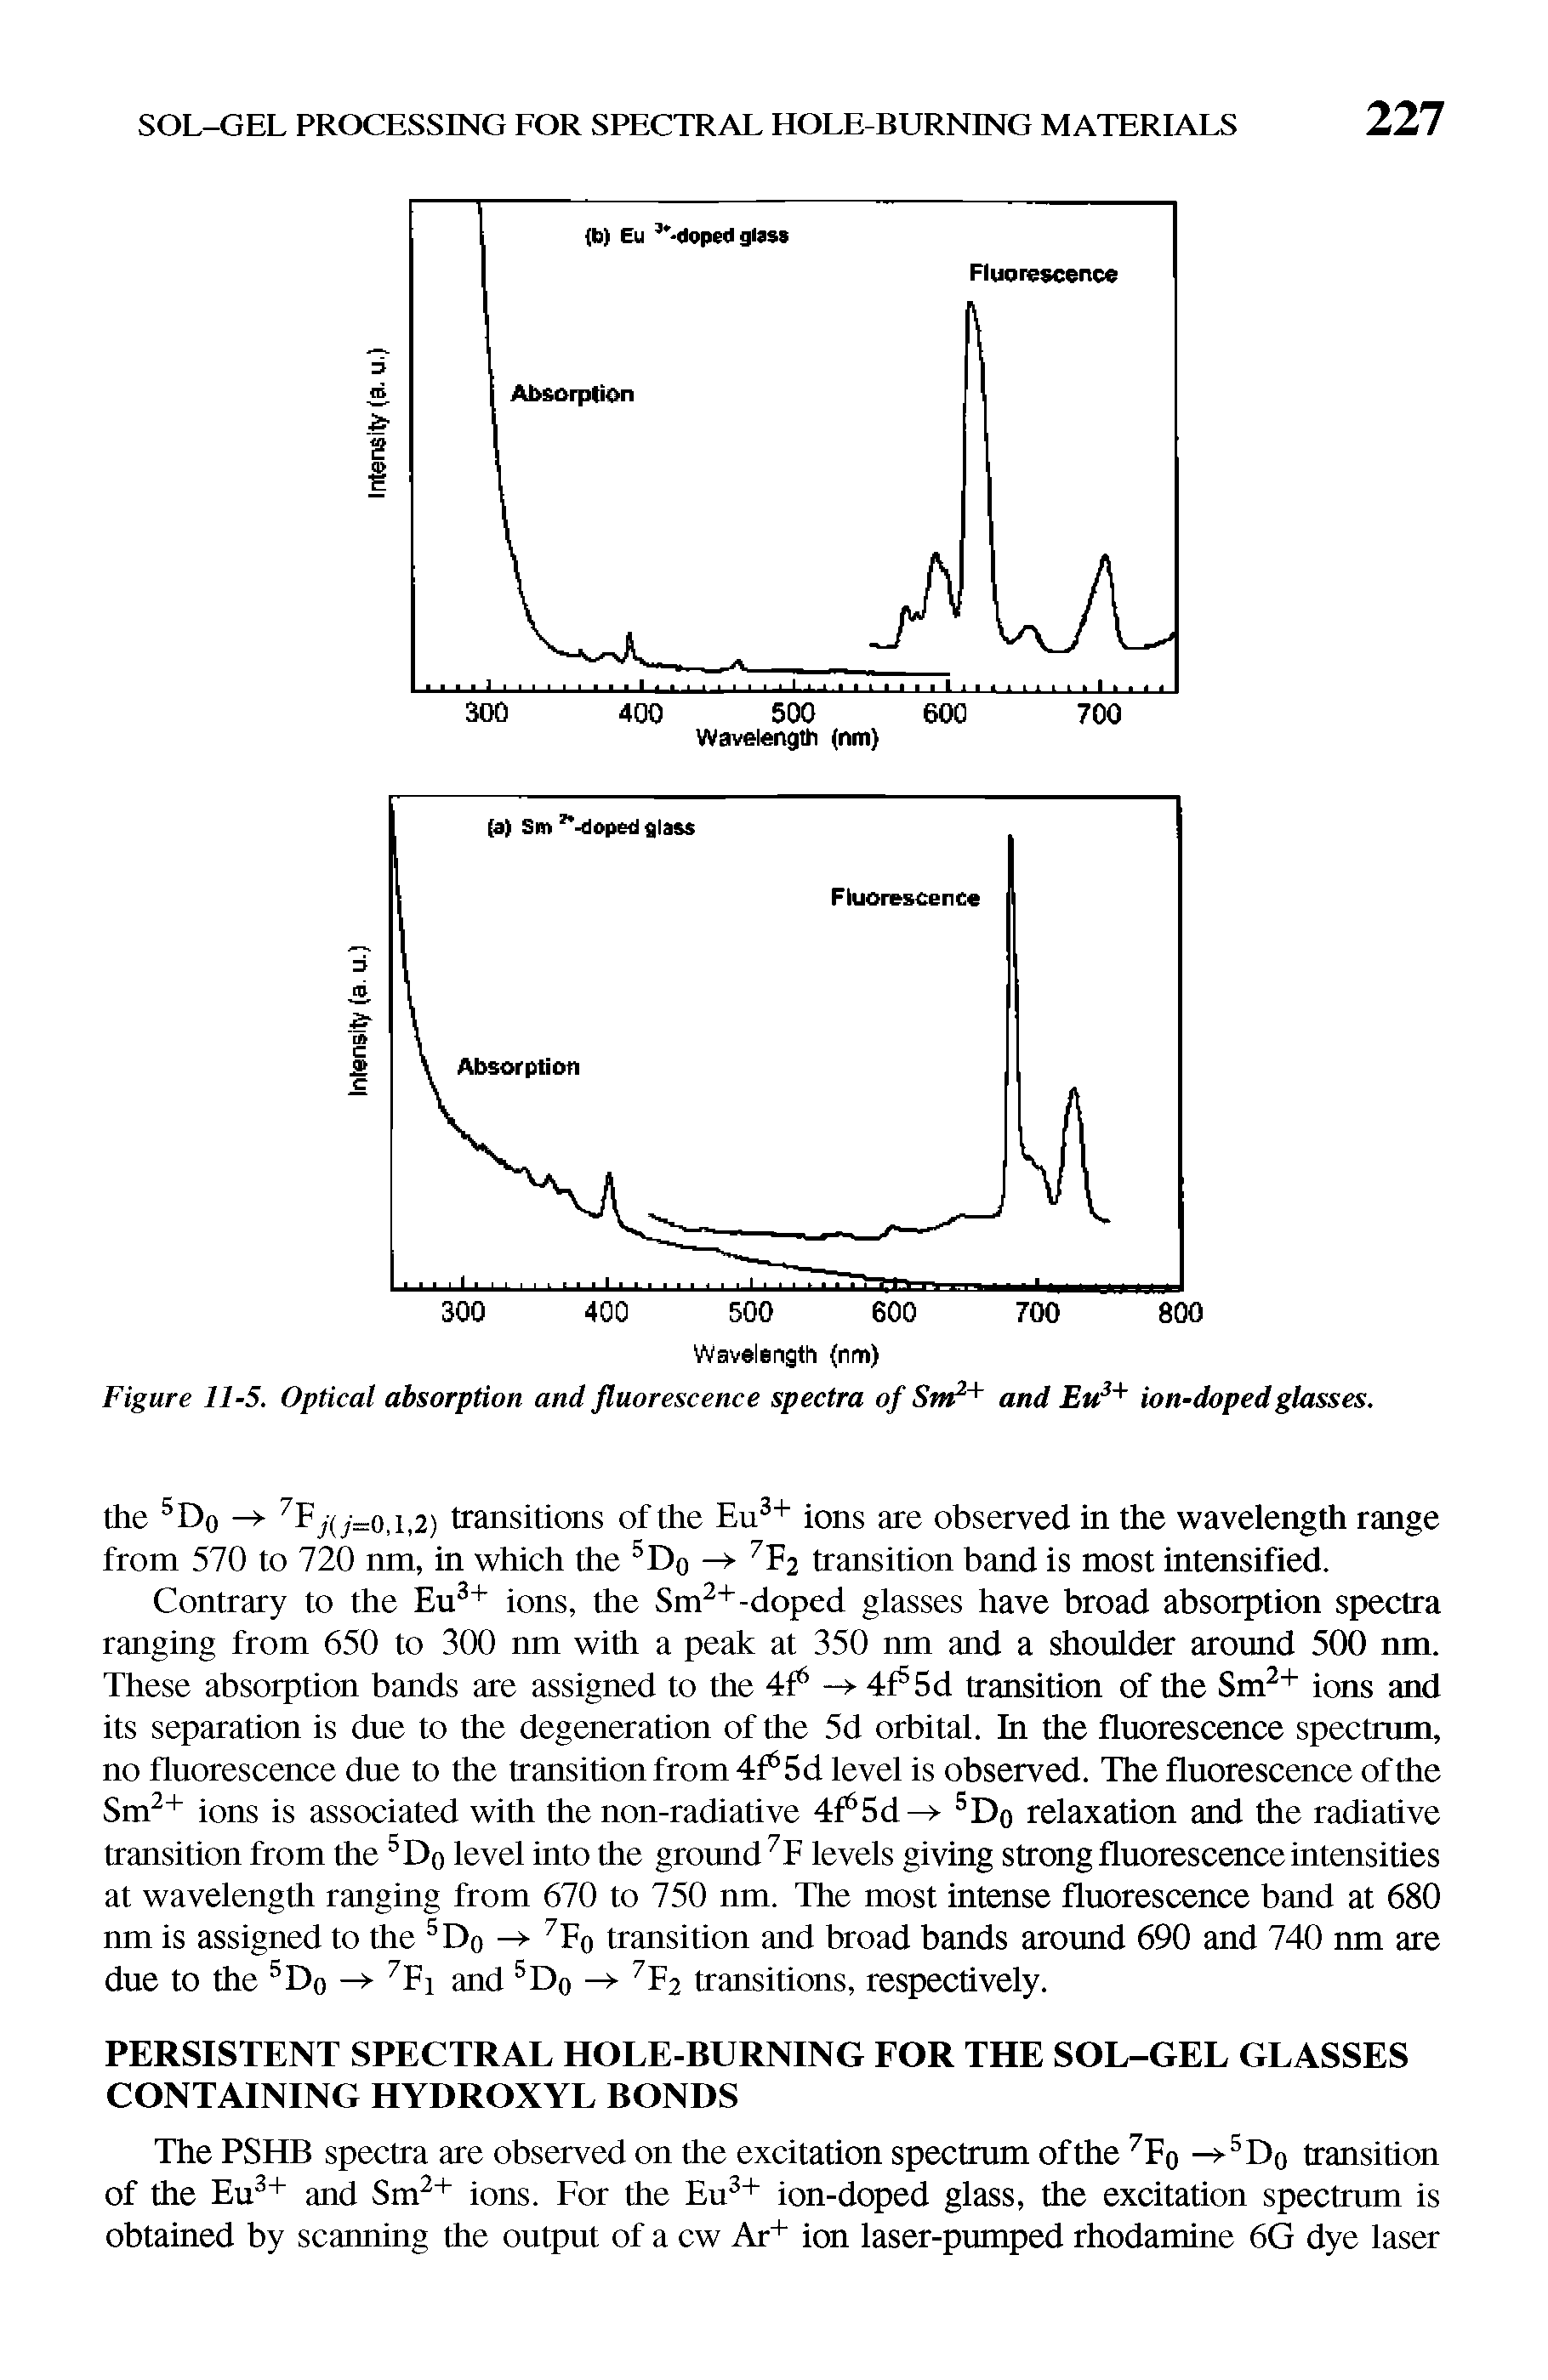 Figure 11-5. Optical absorption and fluorescence spectra of Sn and ion-doped glasses.